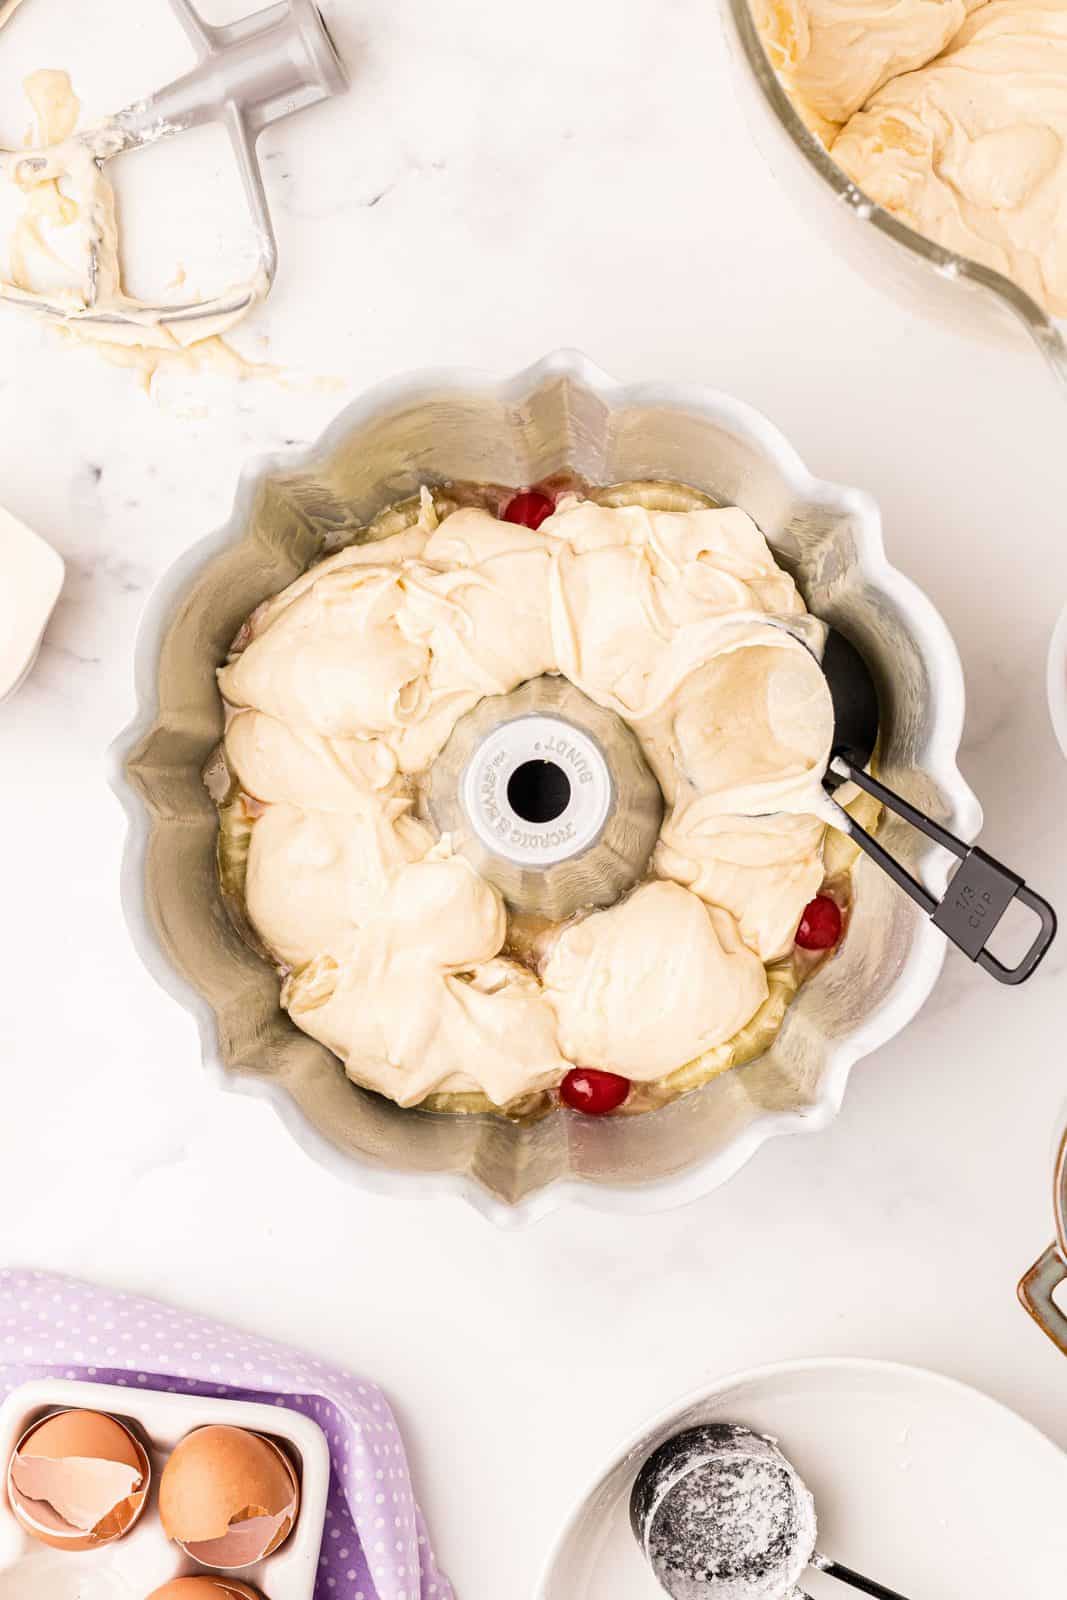 Measuring cup spreading cake batter over pineapple and cherries in bundt pan.